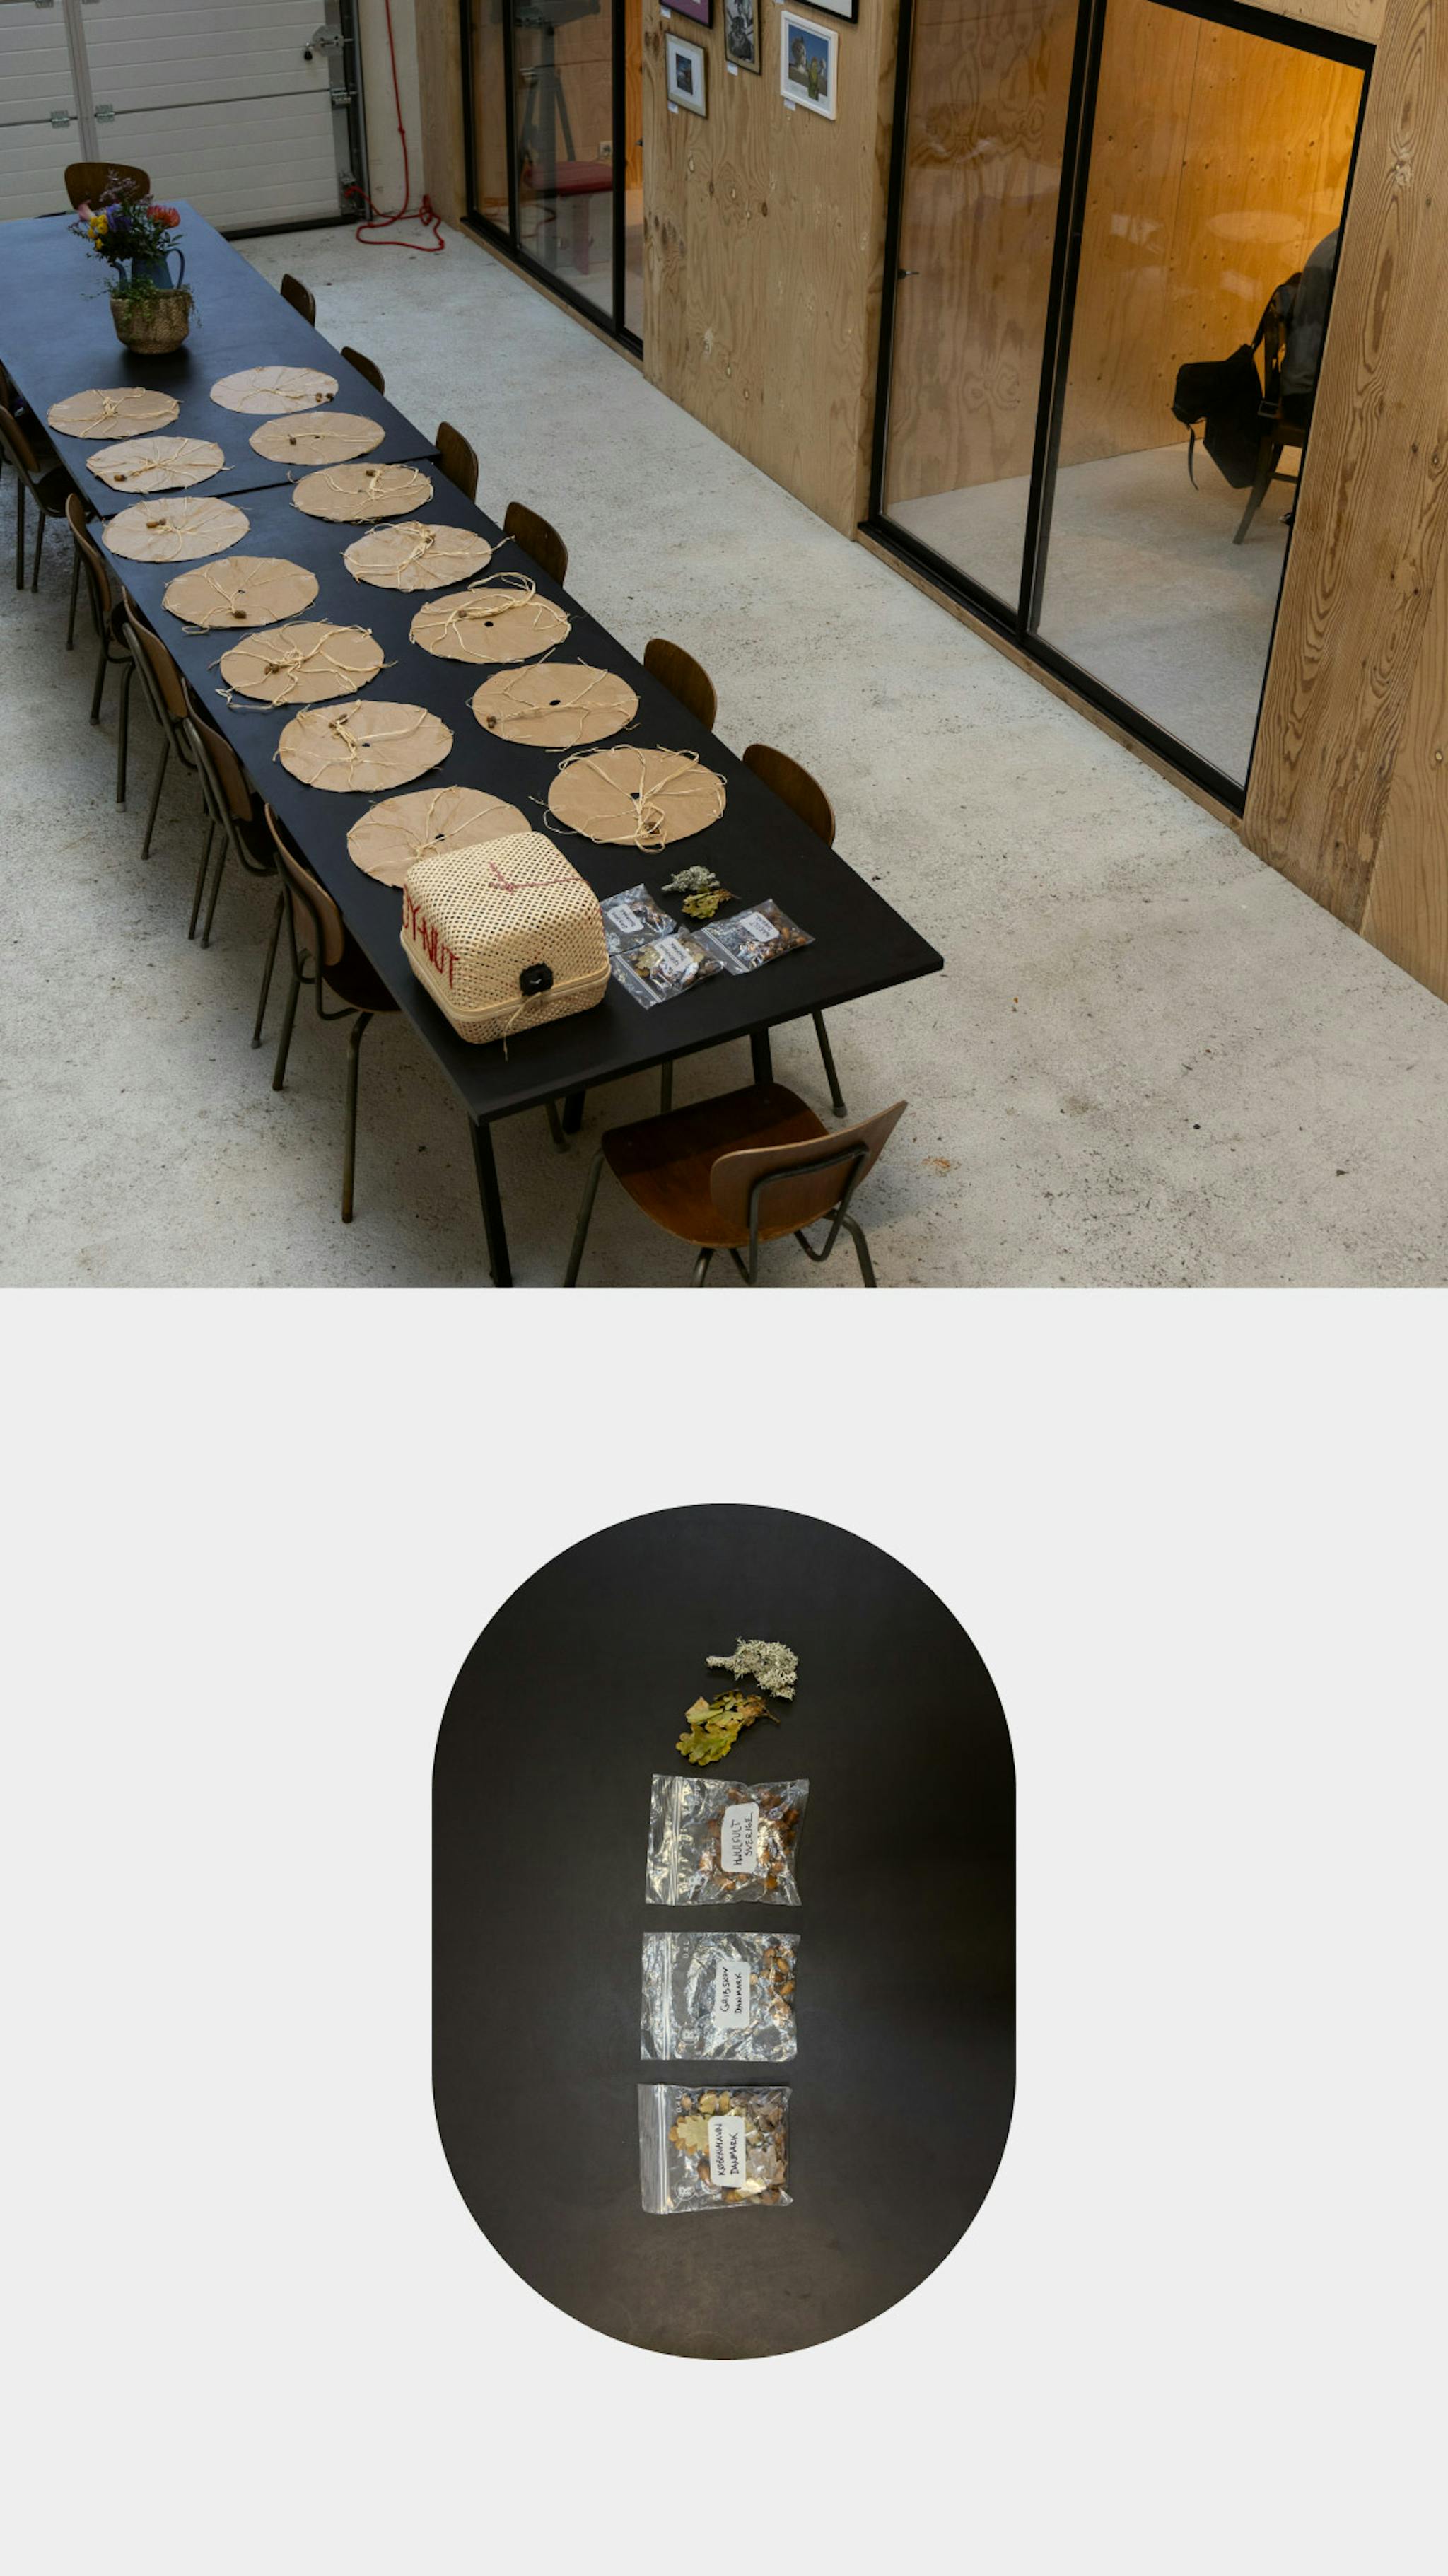 Two images: on the top is a table with hand made parachutes laid out and small plastic bags. The same three bags are featured on the bottom image closeup. 